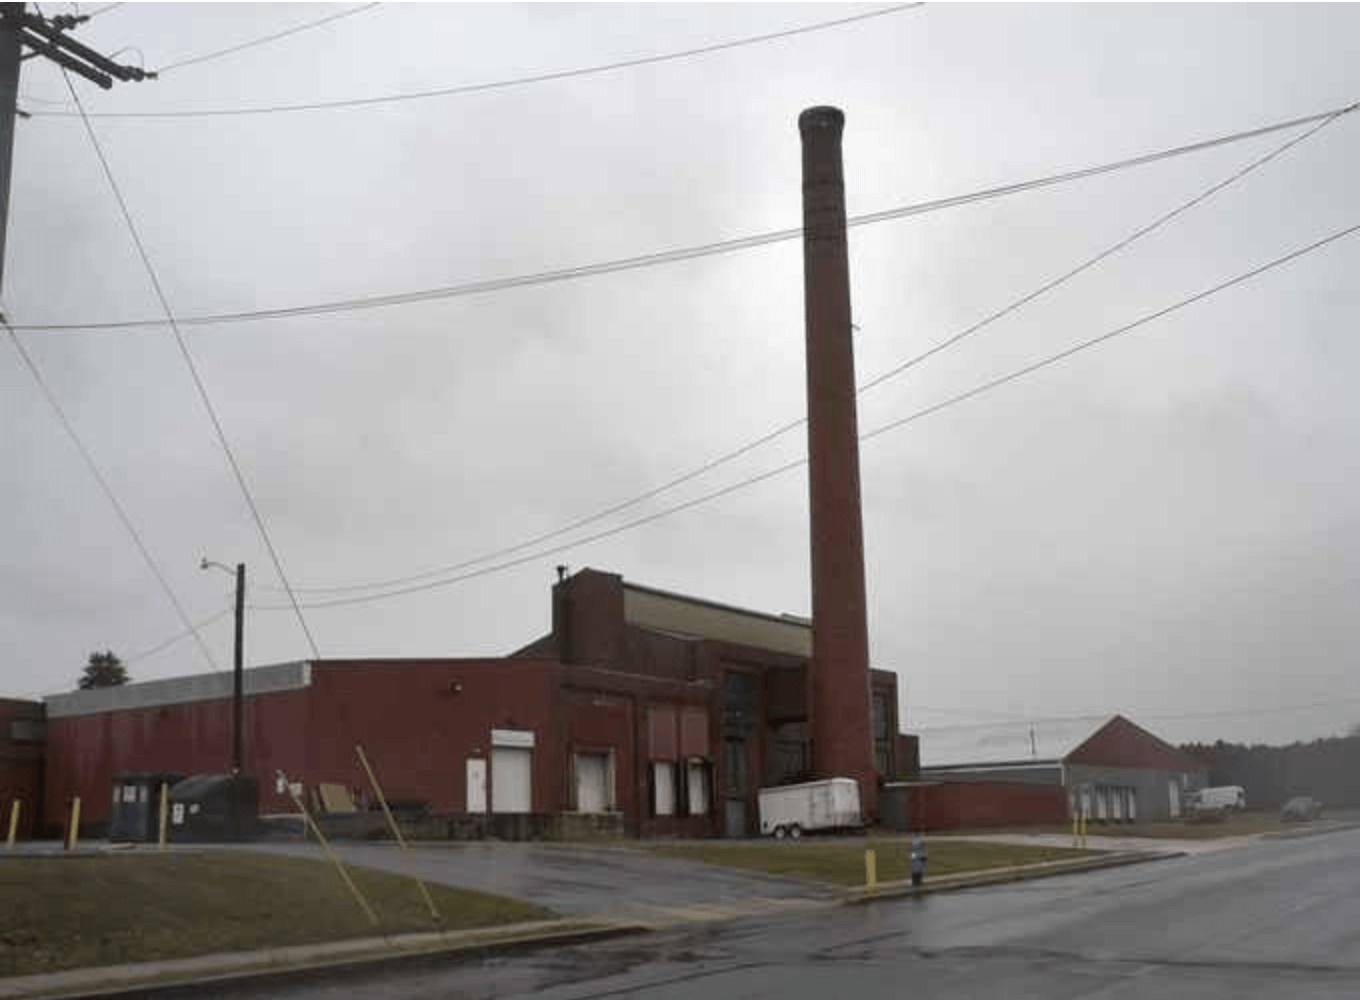 A brick building with a chimney in front of it